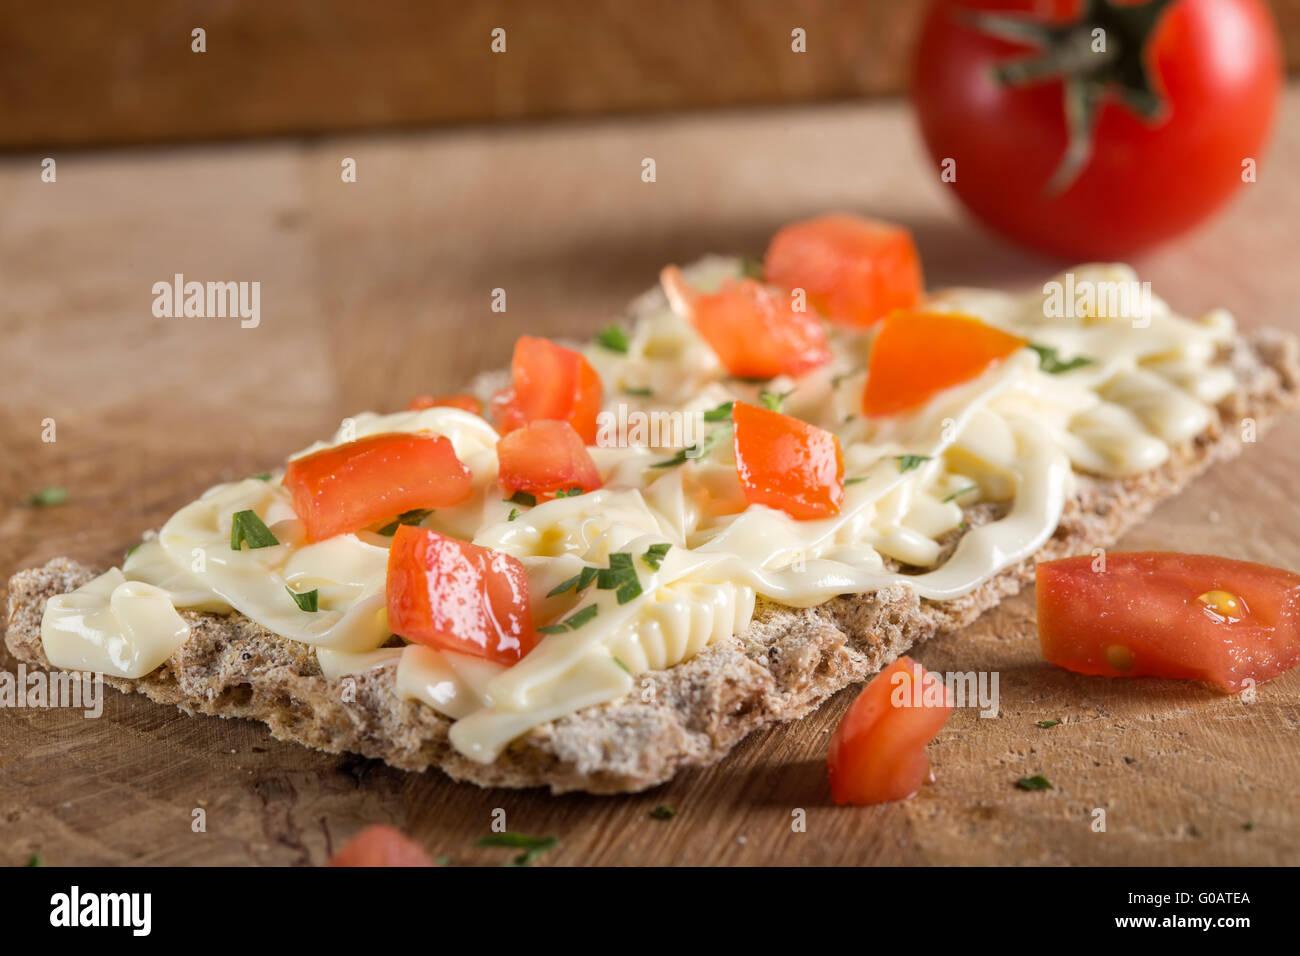 Crispbread with cheese, tomato and herbs on wooden background. Healthy breakfast. Stock Photo